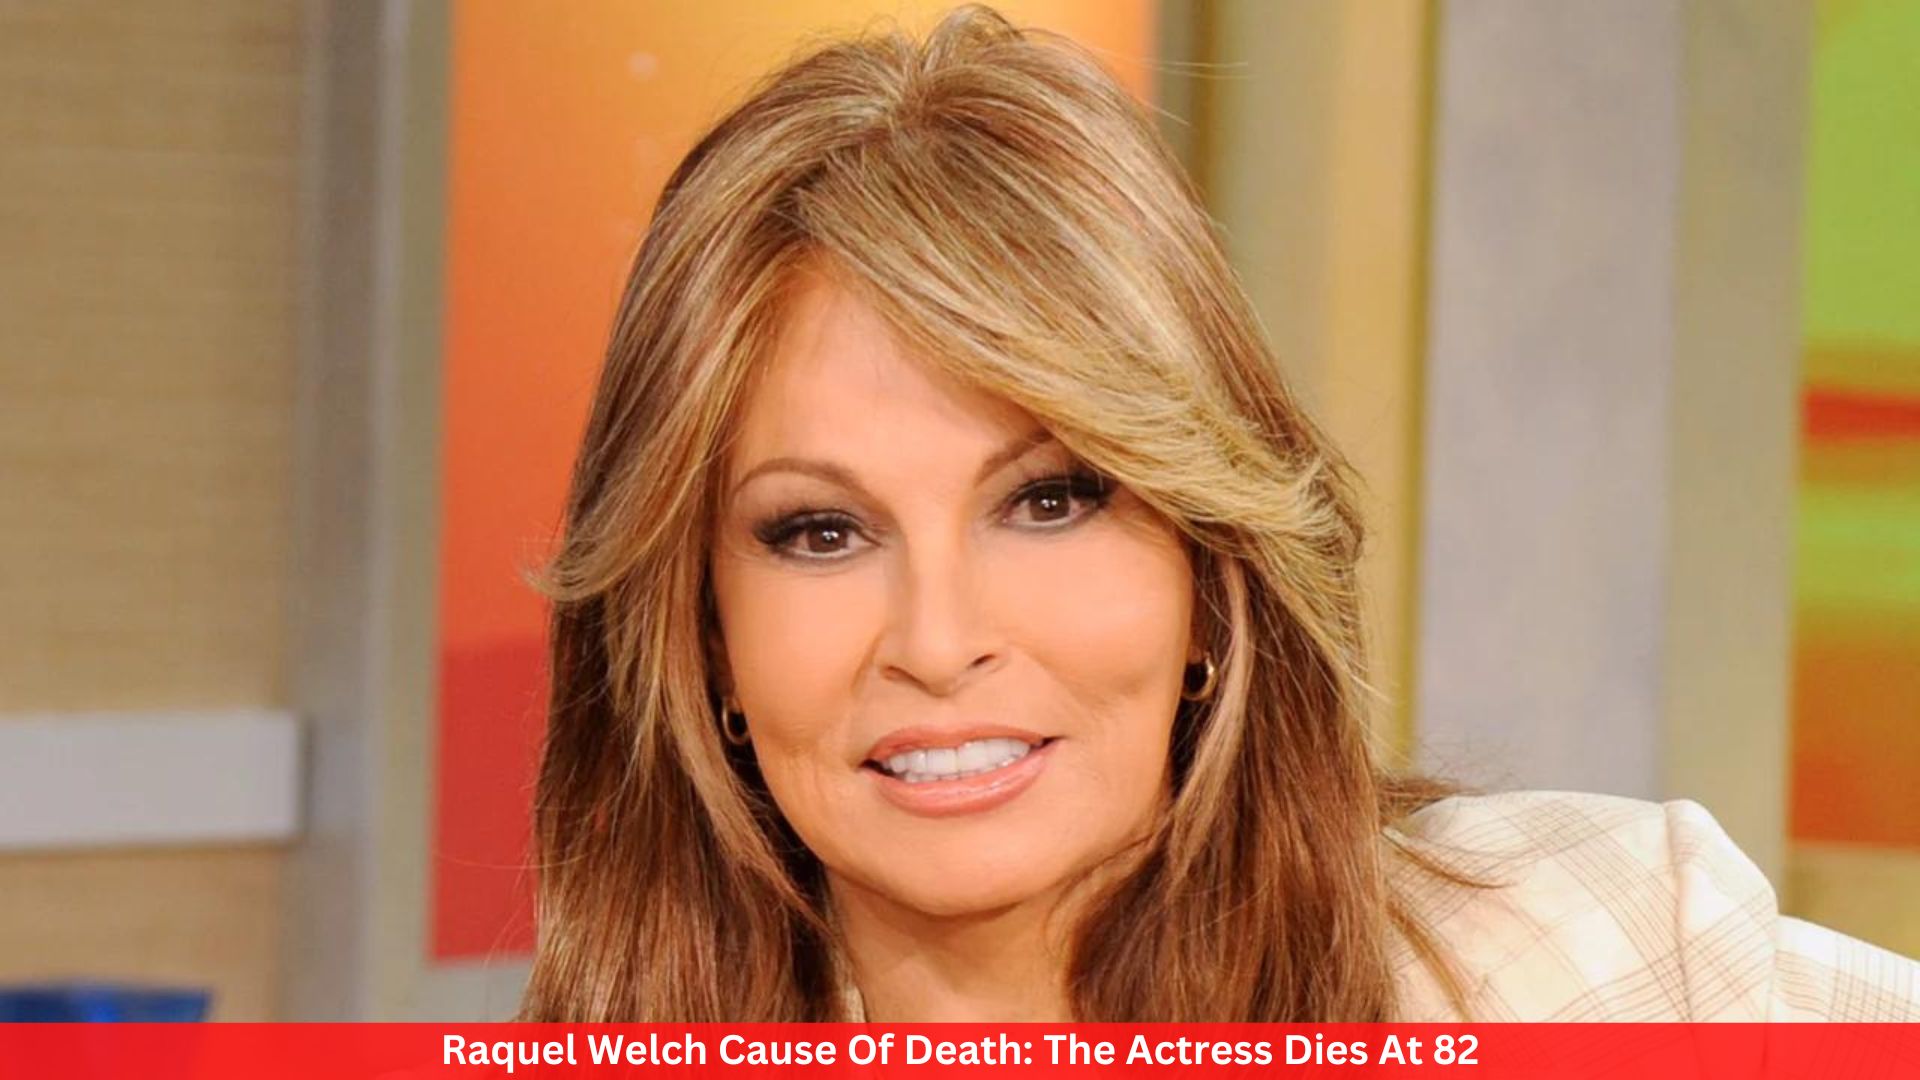 Raquel Welch Cause Of Death: The Actress Dies At 82